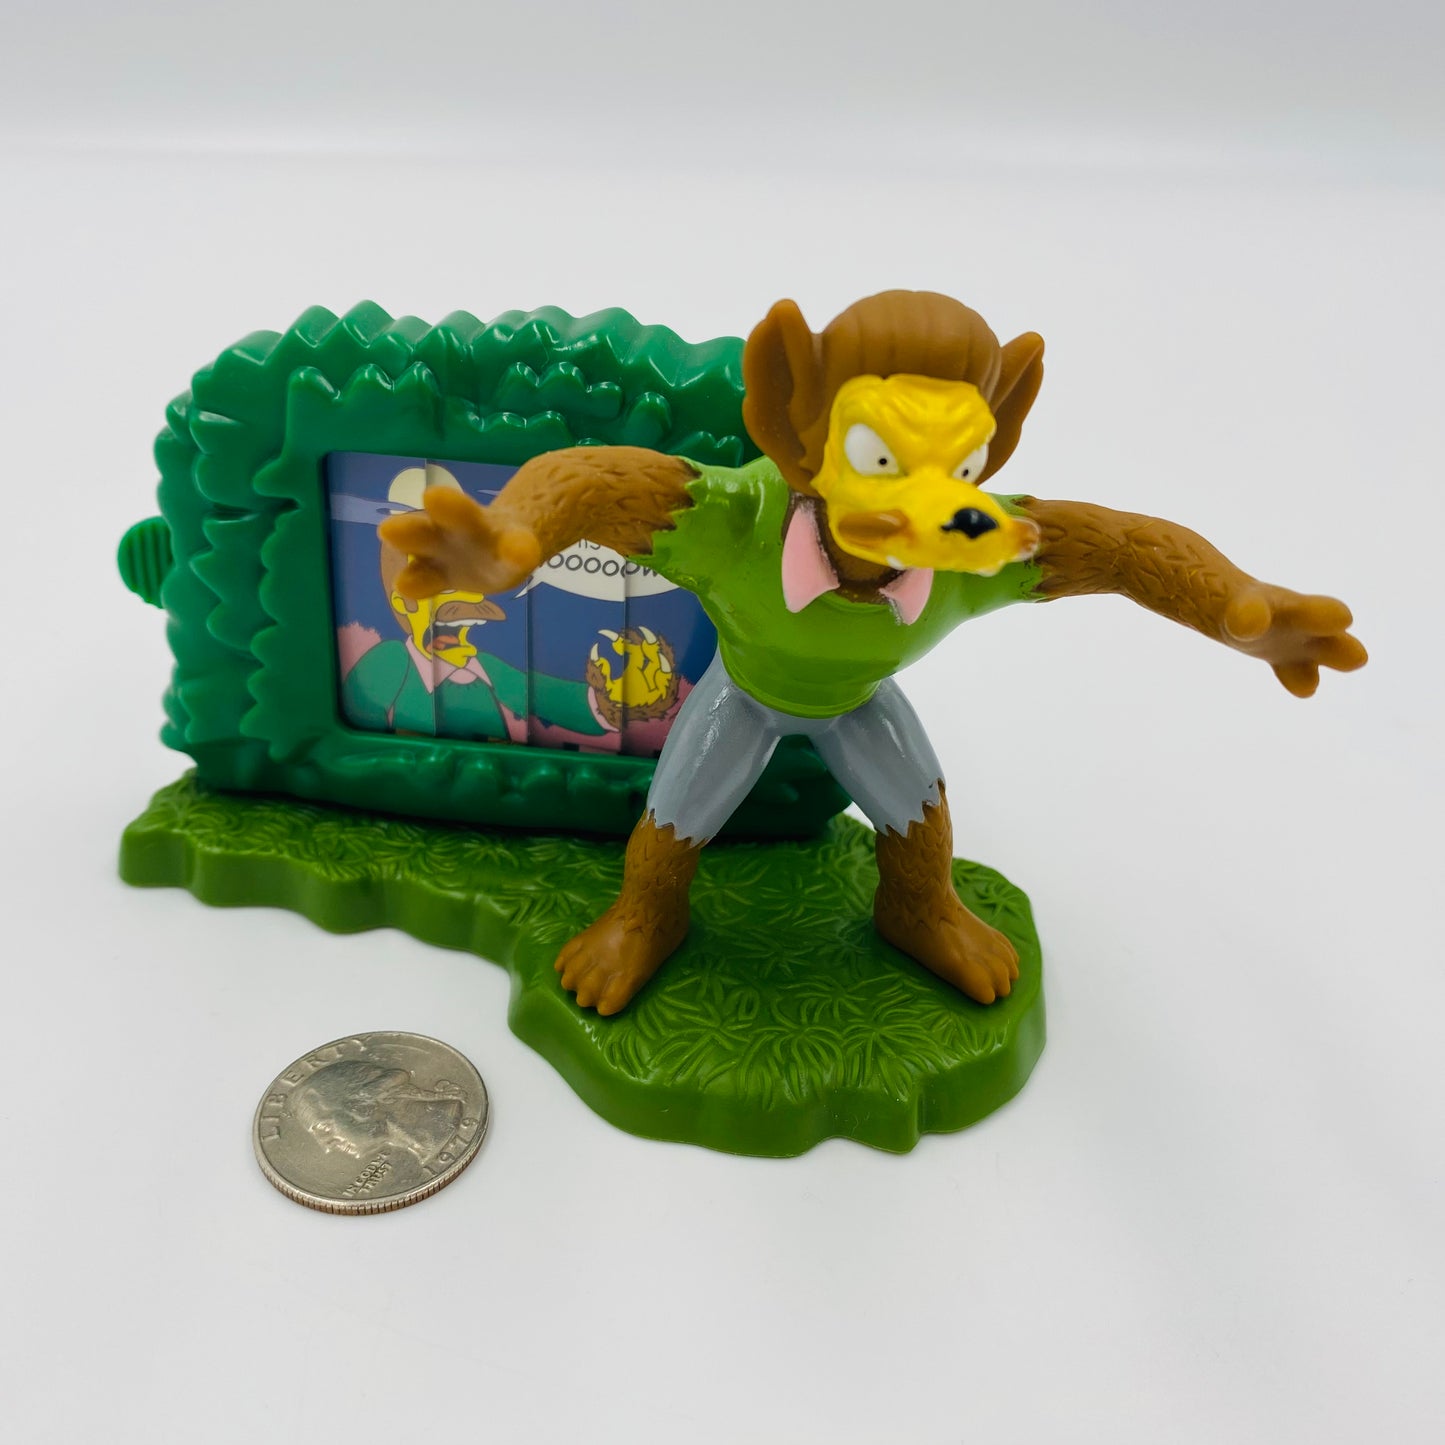 The Simpsons Creepy Classics Ned Flanders Burger King Kids' Meals toy (2002) loose